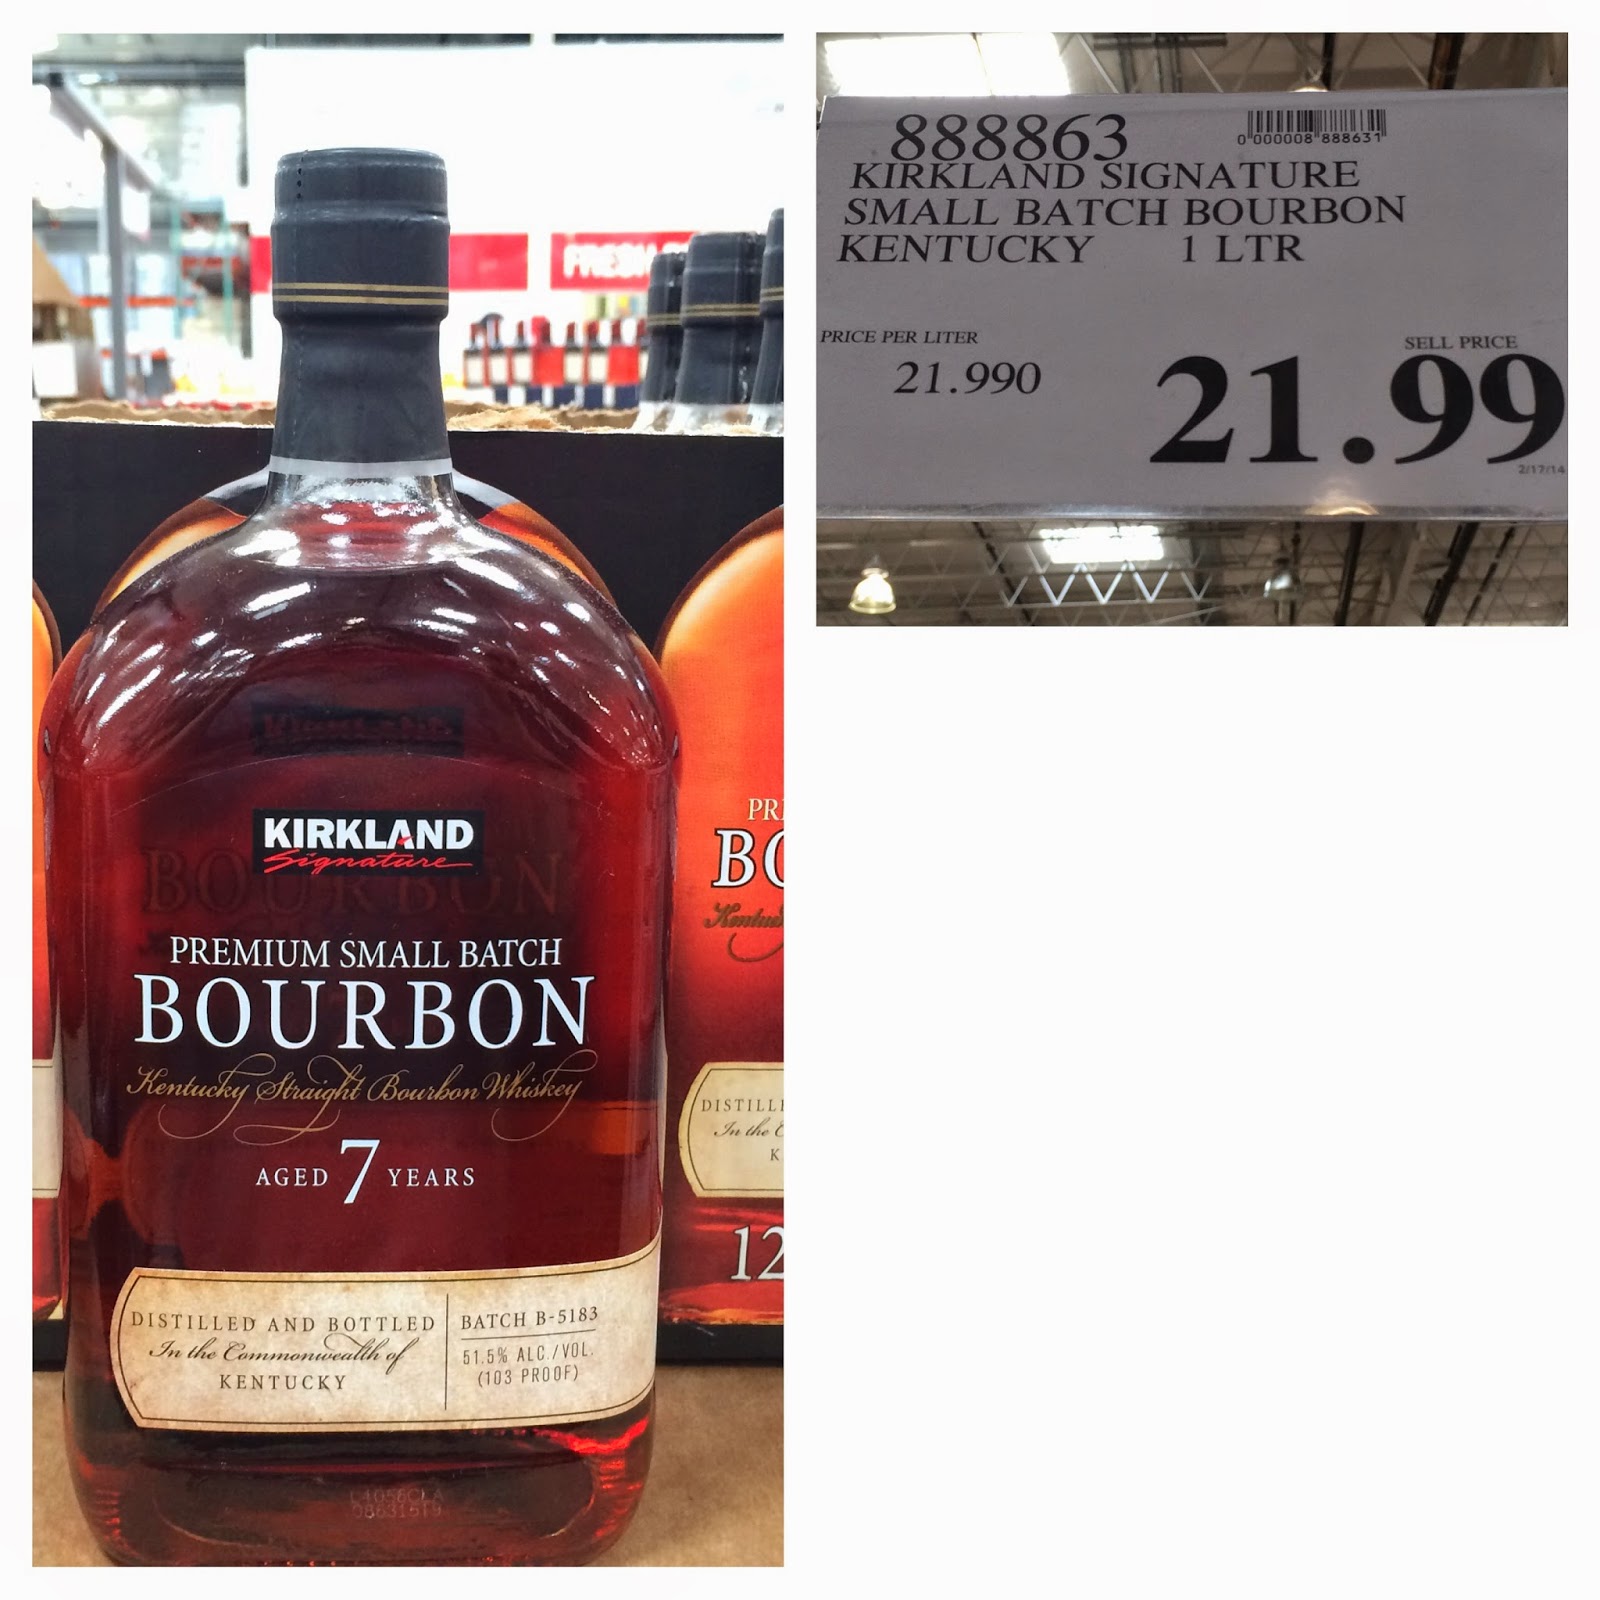 Can you buy liquor in Maryland on Sundays?